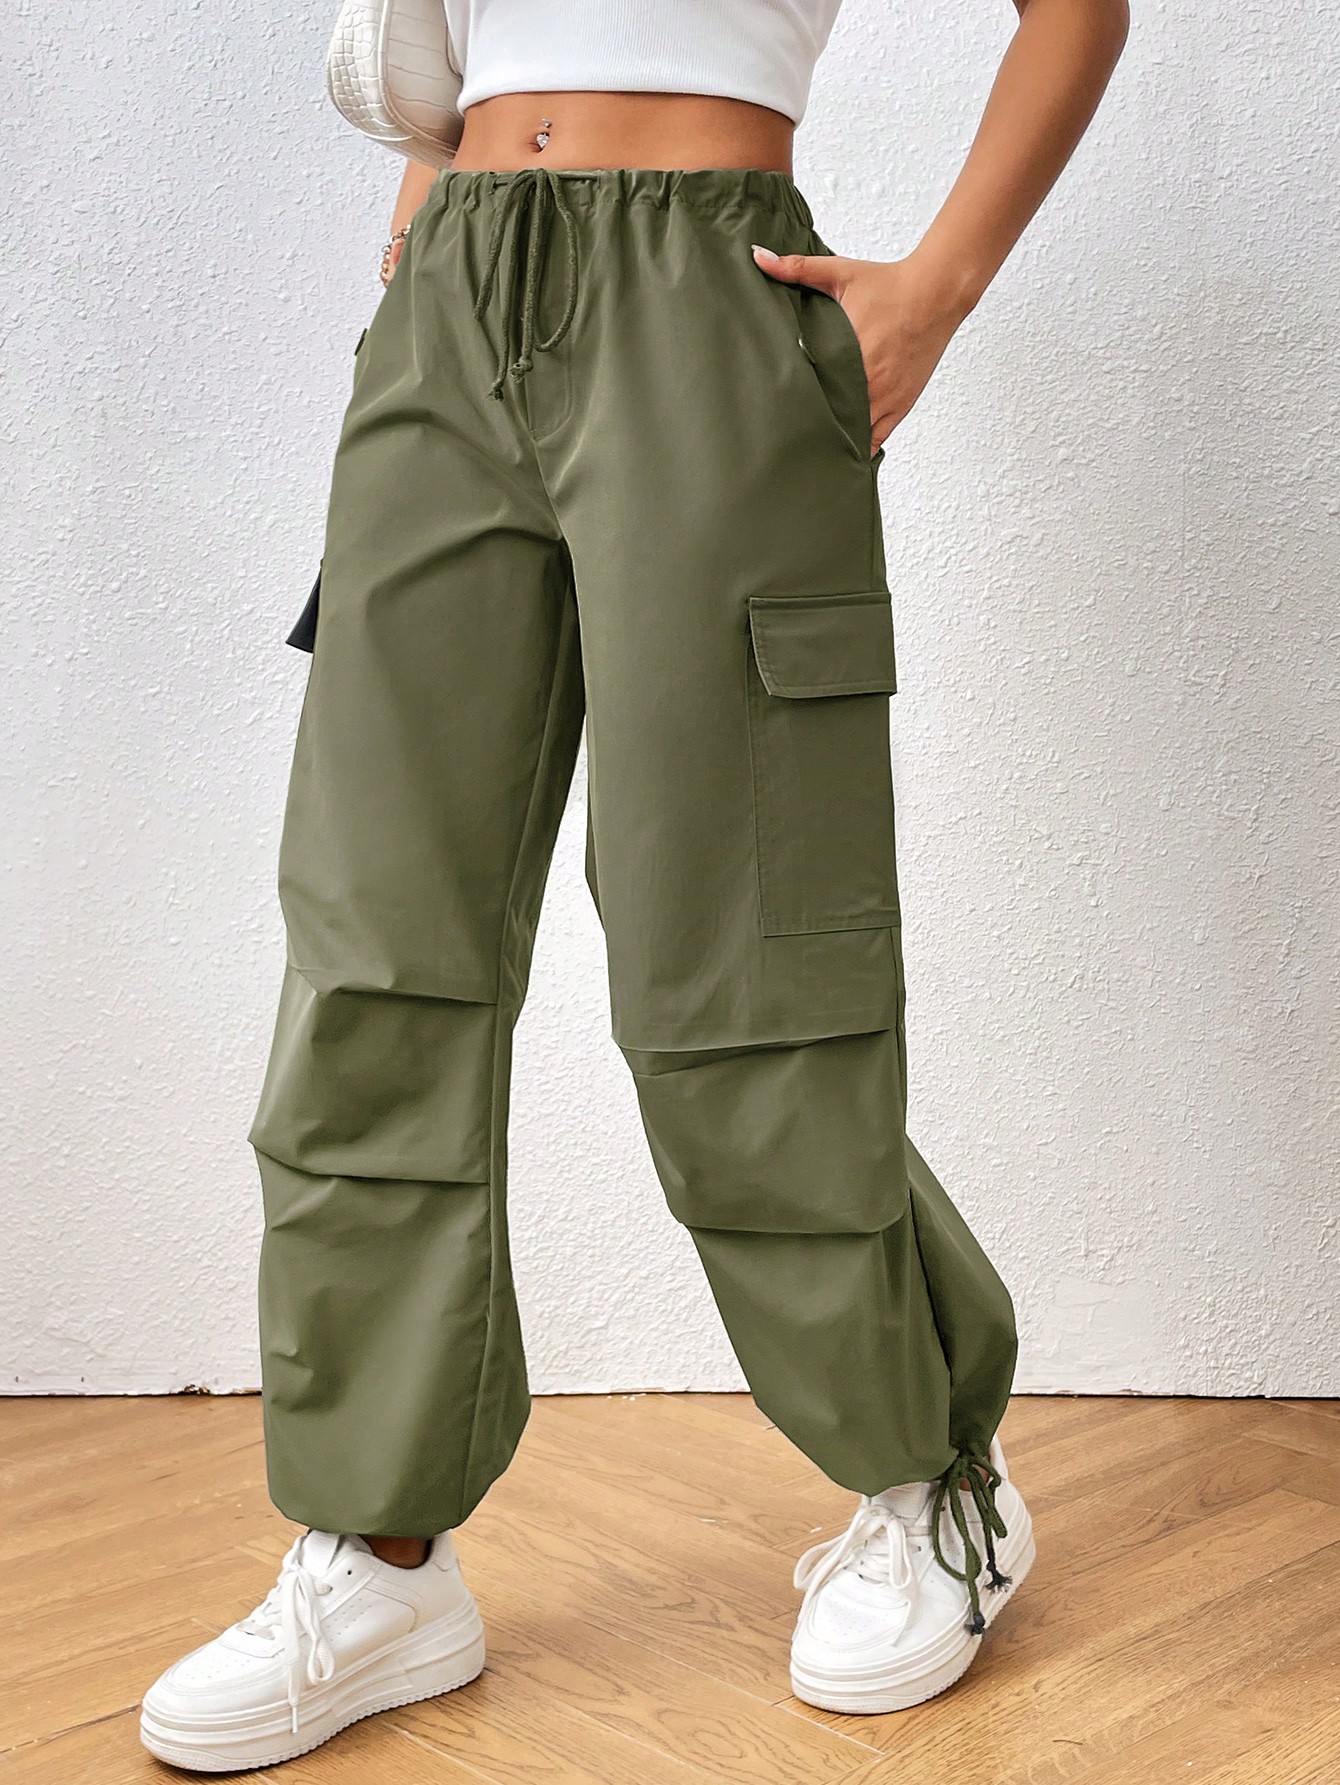 green cargo pants outfit 💚 #outfitoftheday #casualoutfit #ootd  #greencargopants | Casual outfits, Jeans outfit women, Green cargo pants  outfit